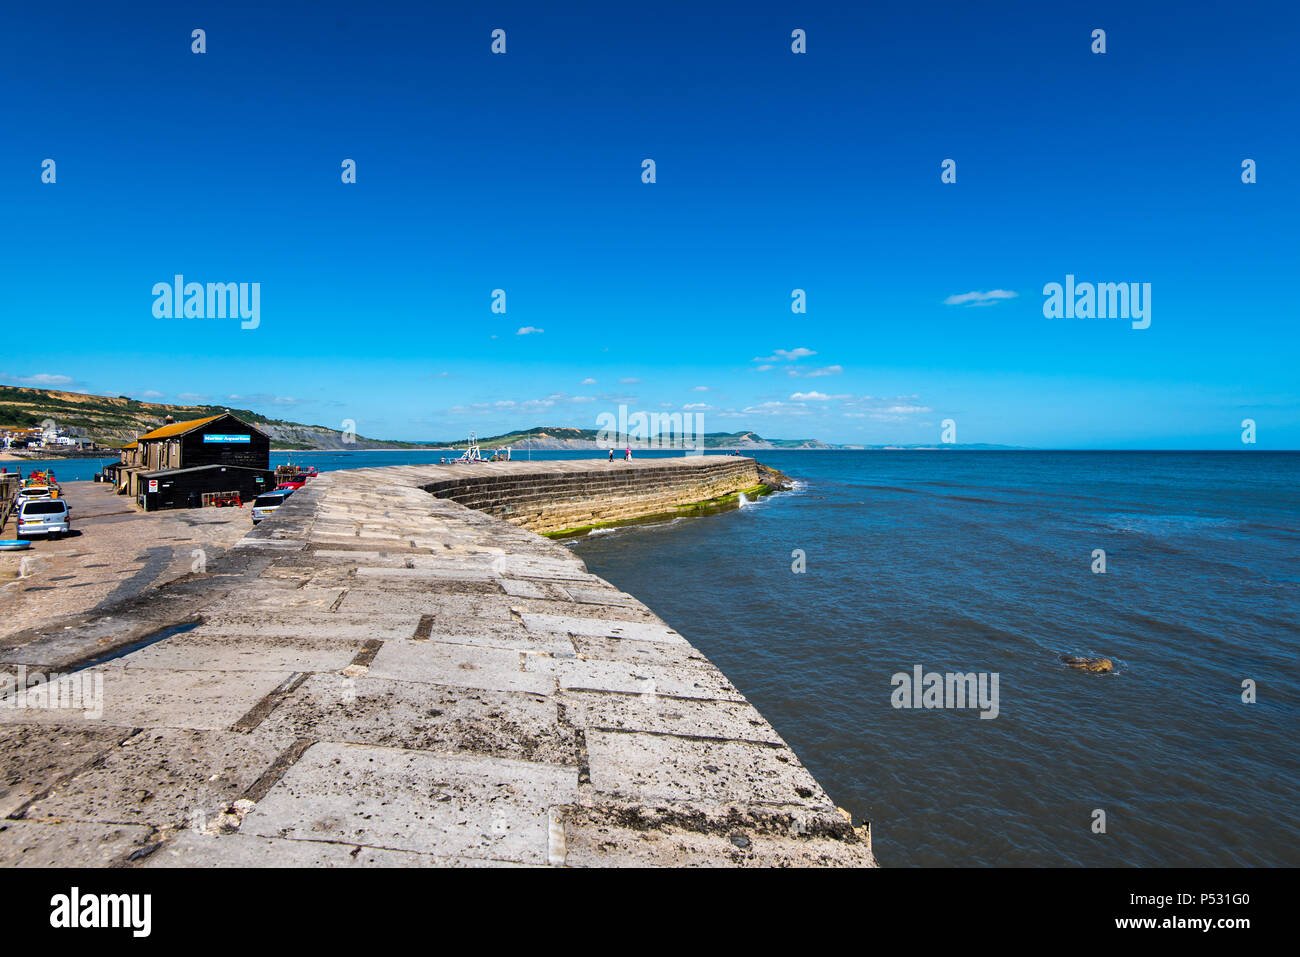 LYME REGIS, DORSET, UK, 14JUN2018: The Cobb is an old stone pier which forms the harbour at Lyme Regis. Stock Photo